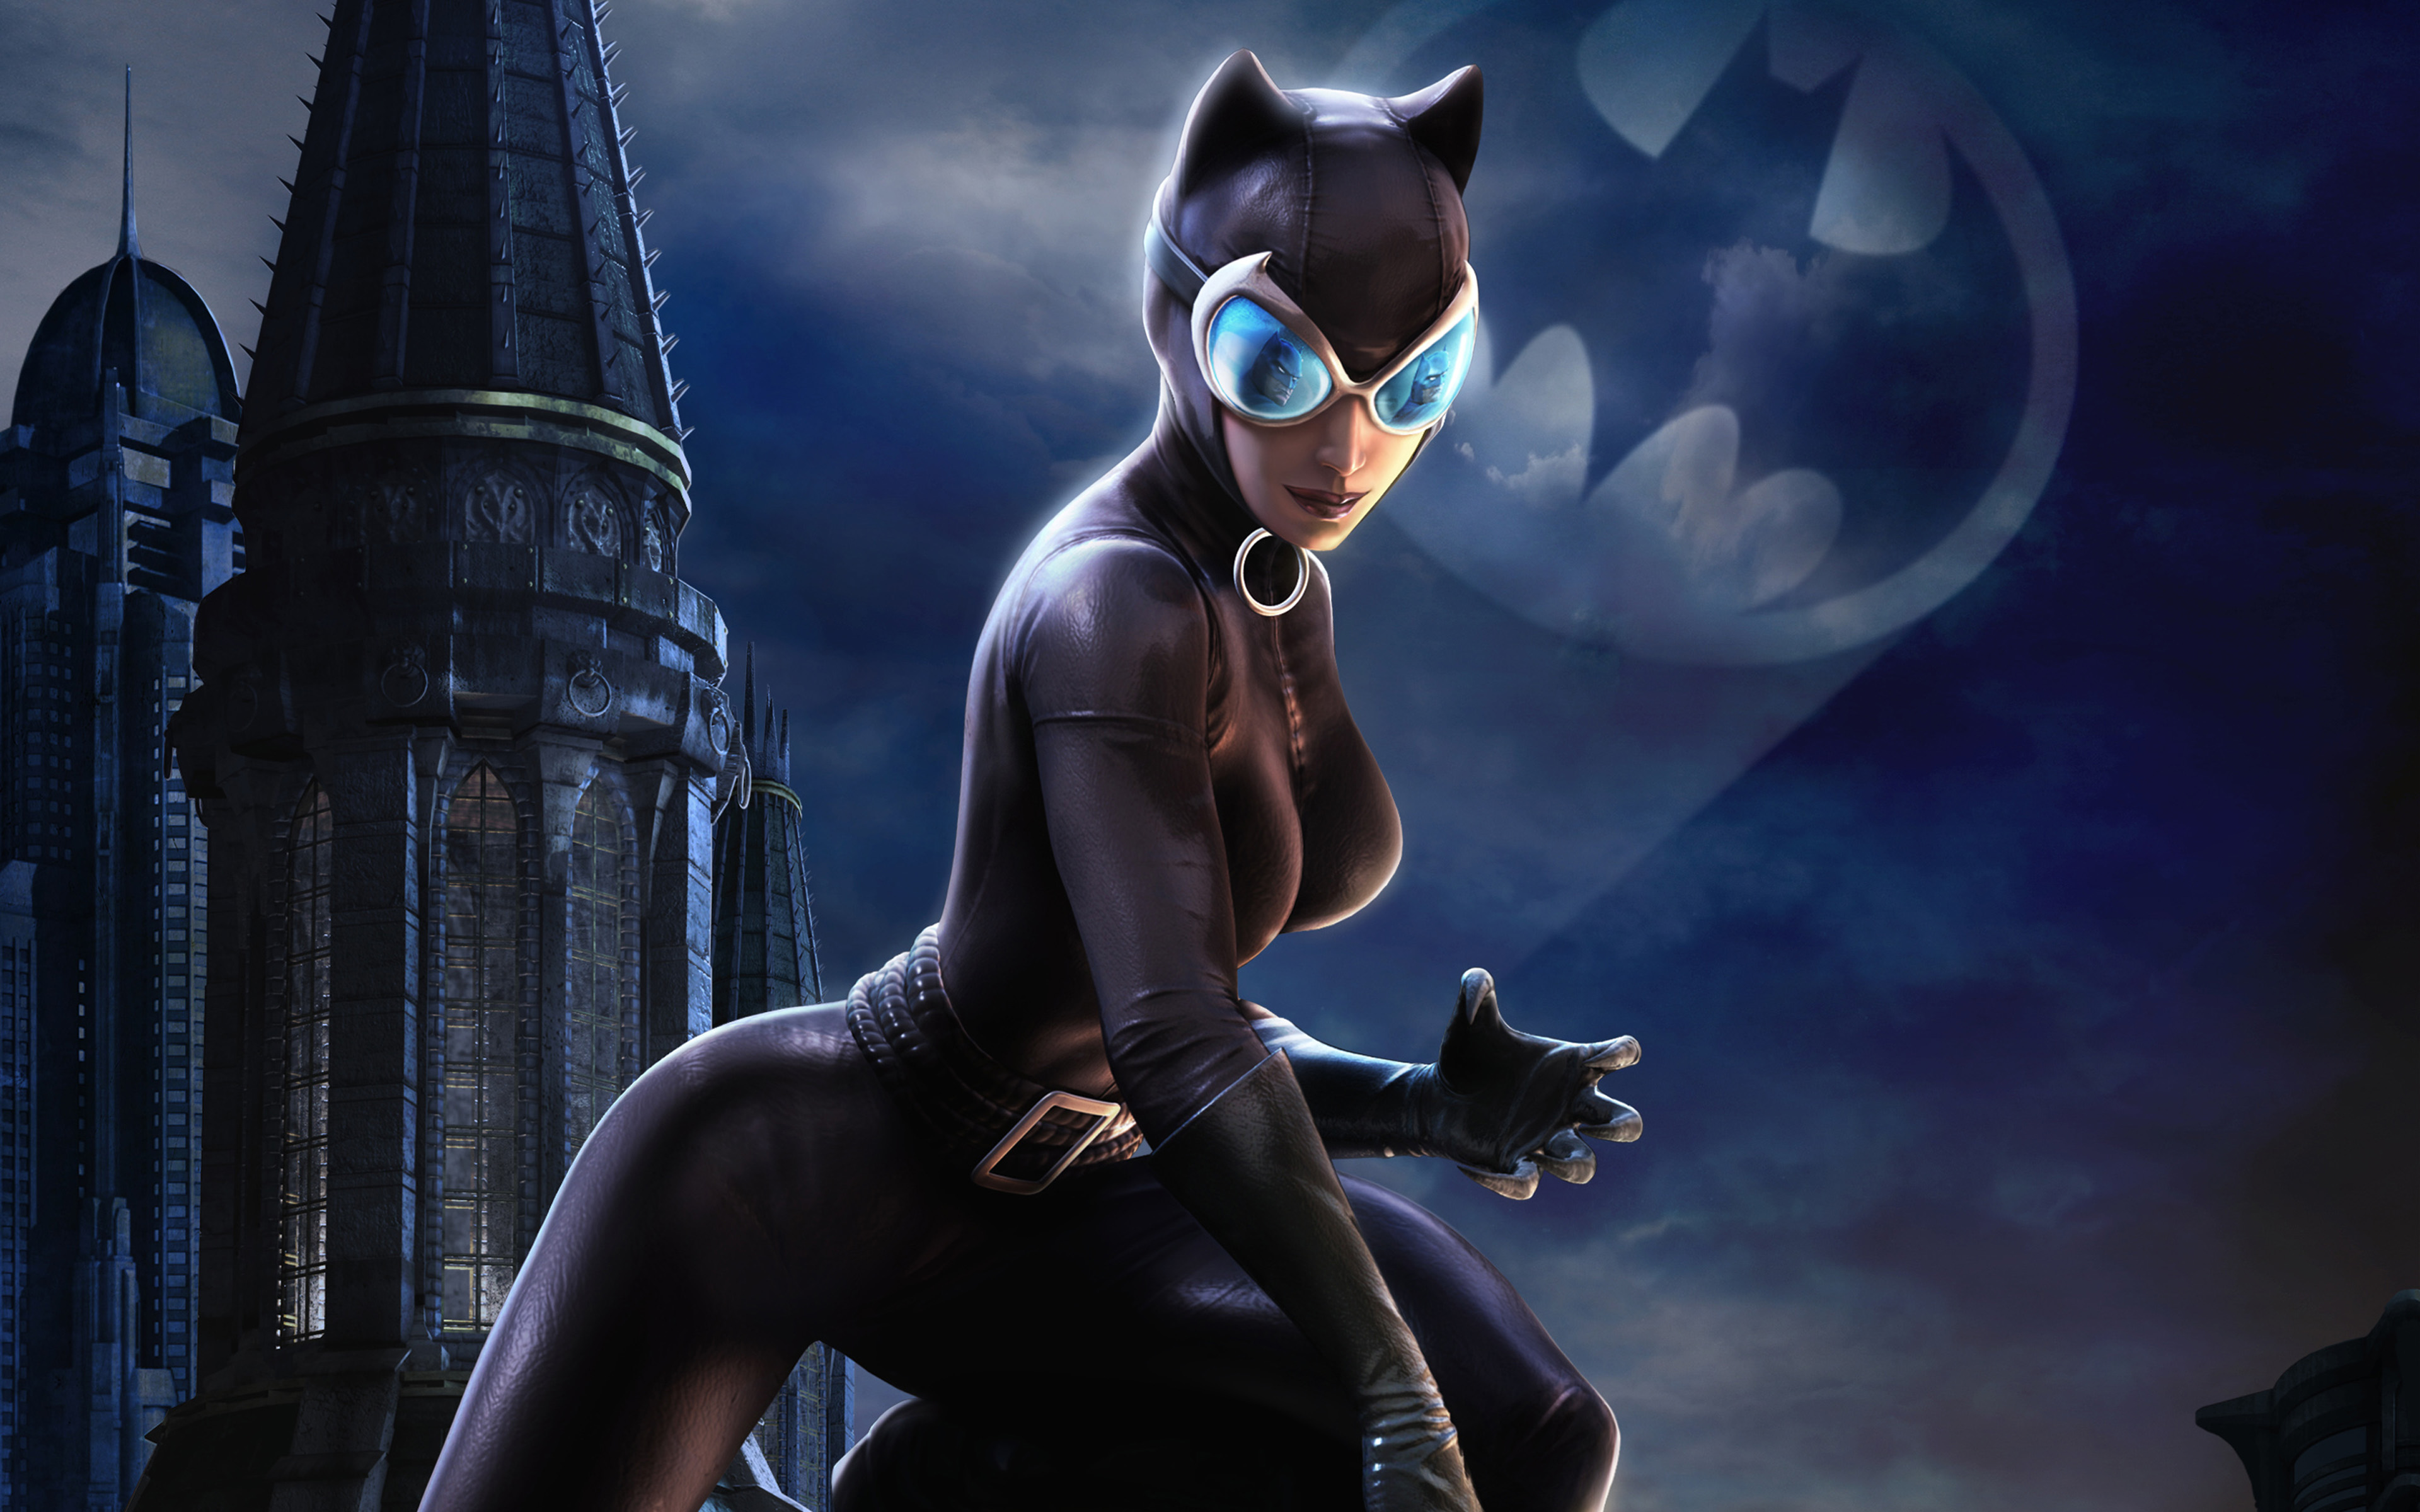 Catwoman Harley Quinn Poison DC Universe cartoon hd wallpapers for mobile  phones and-computer 3840x2400 : 